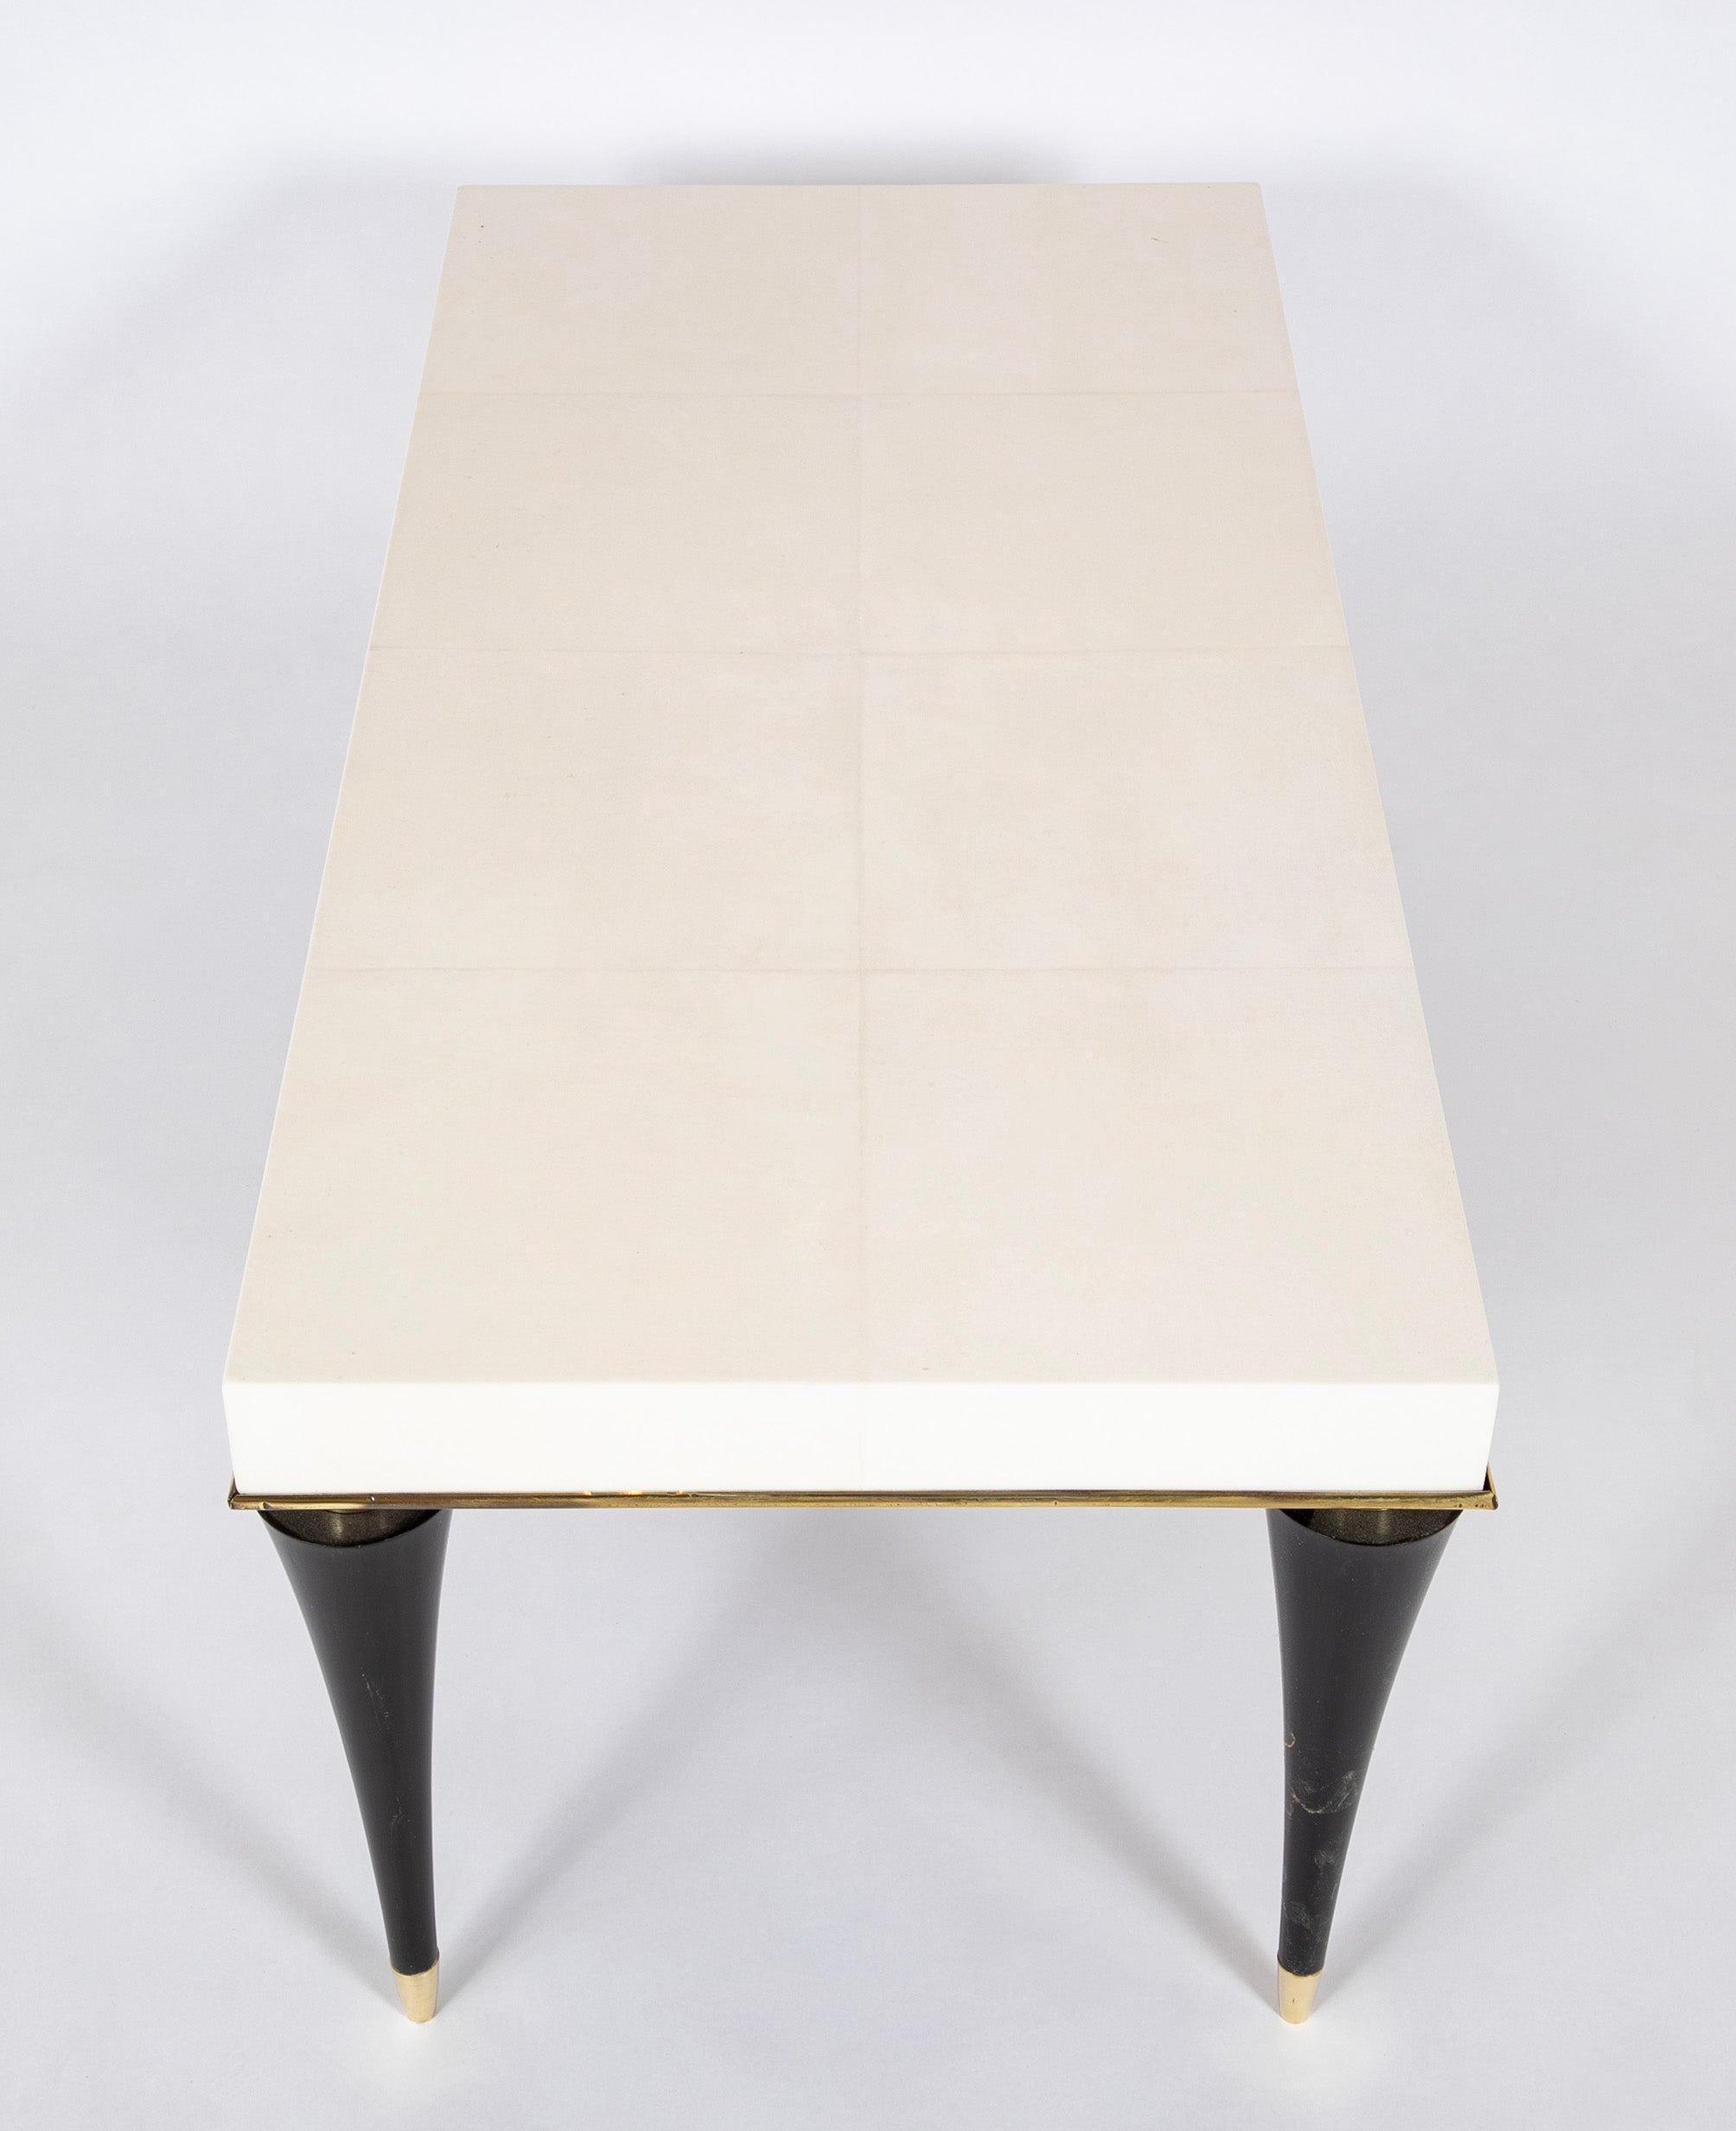 Raoul Labruyere Parchment Top Coffee Table